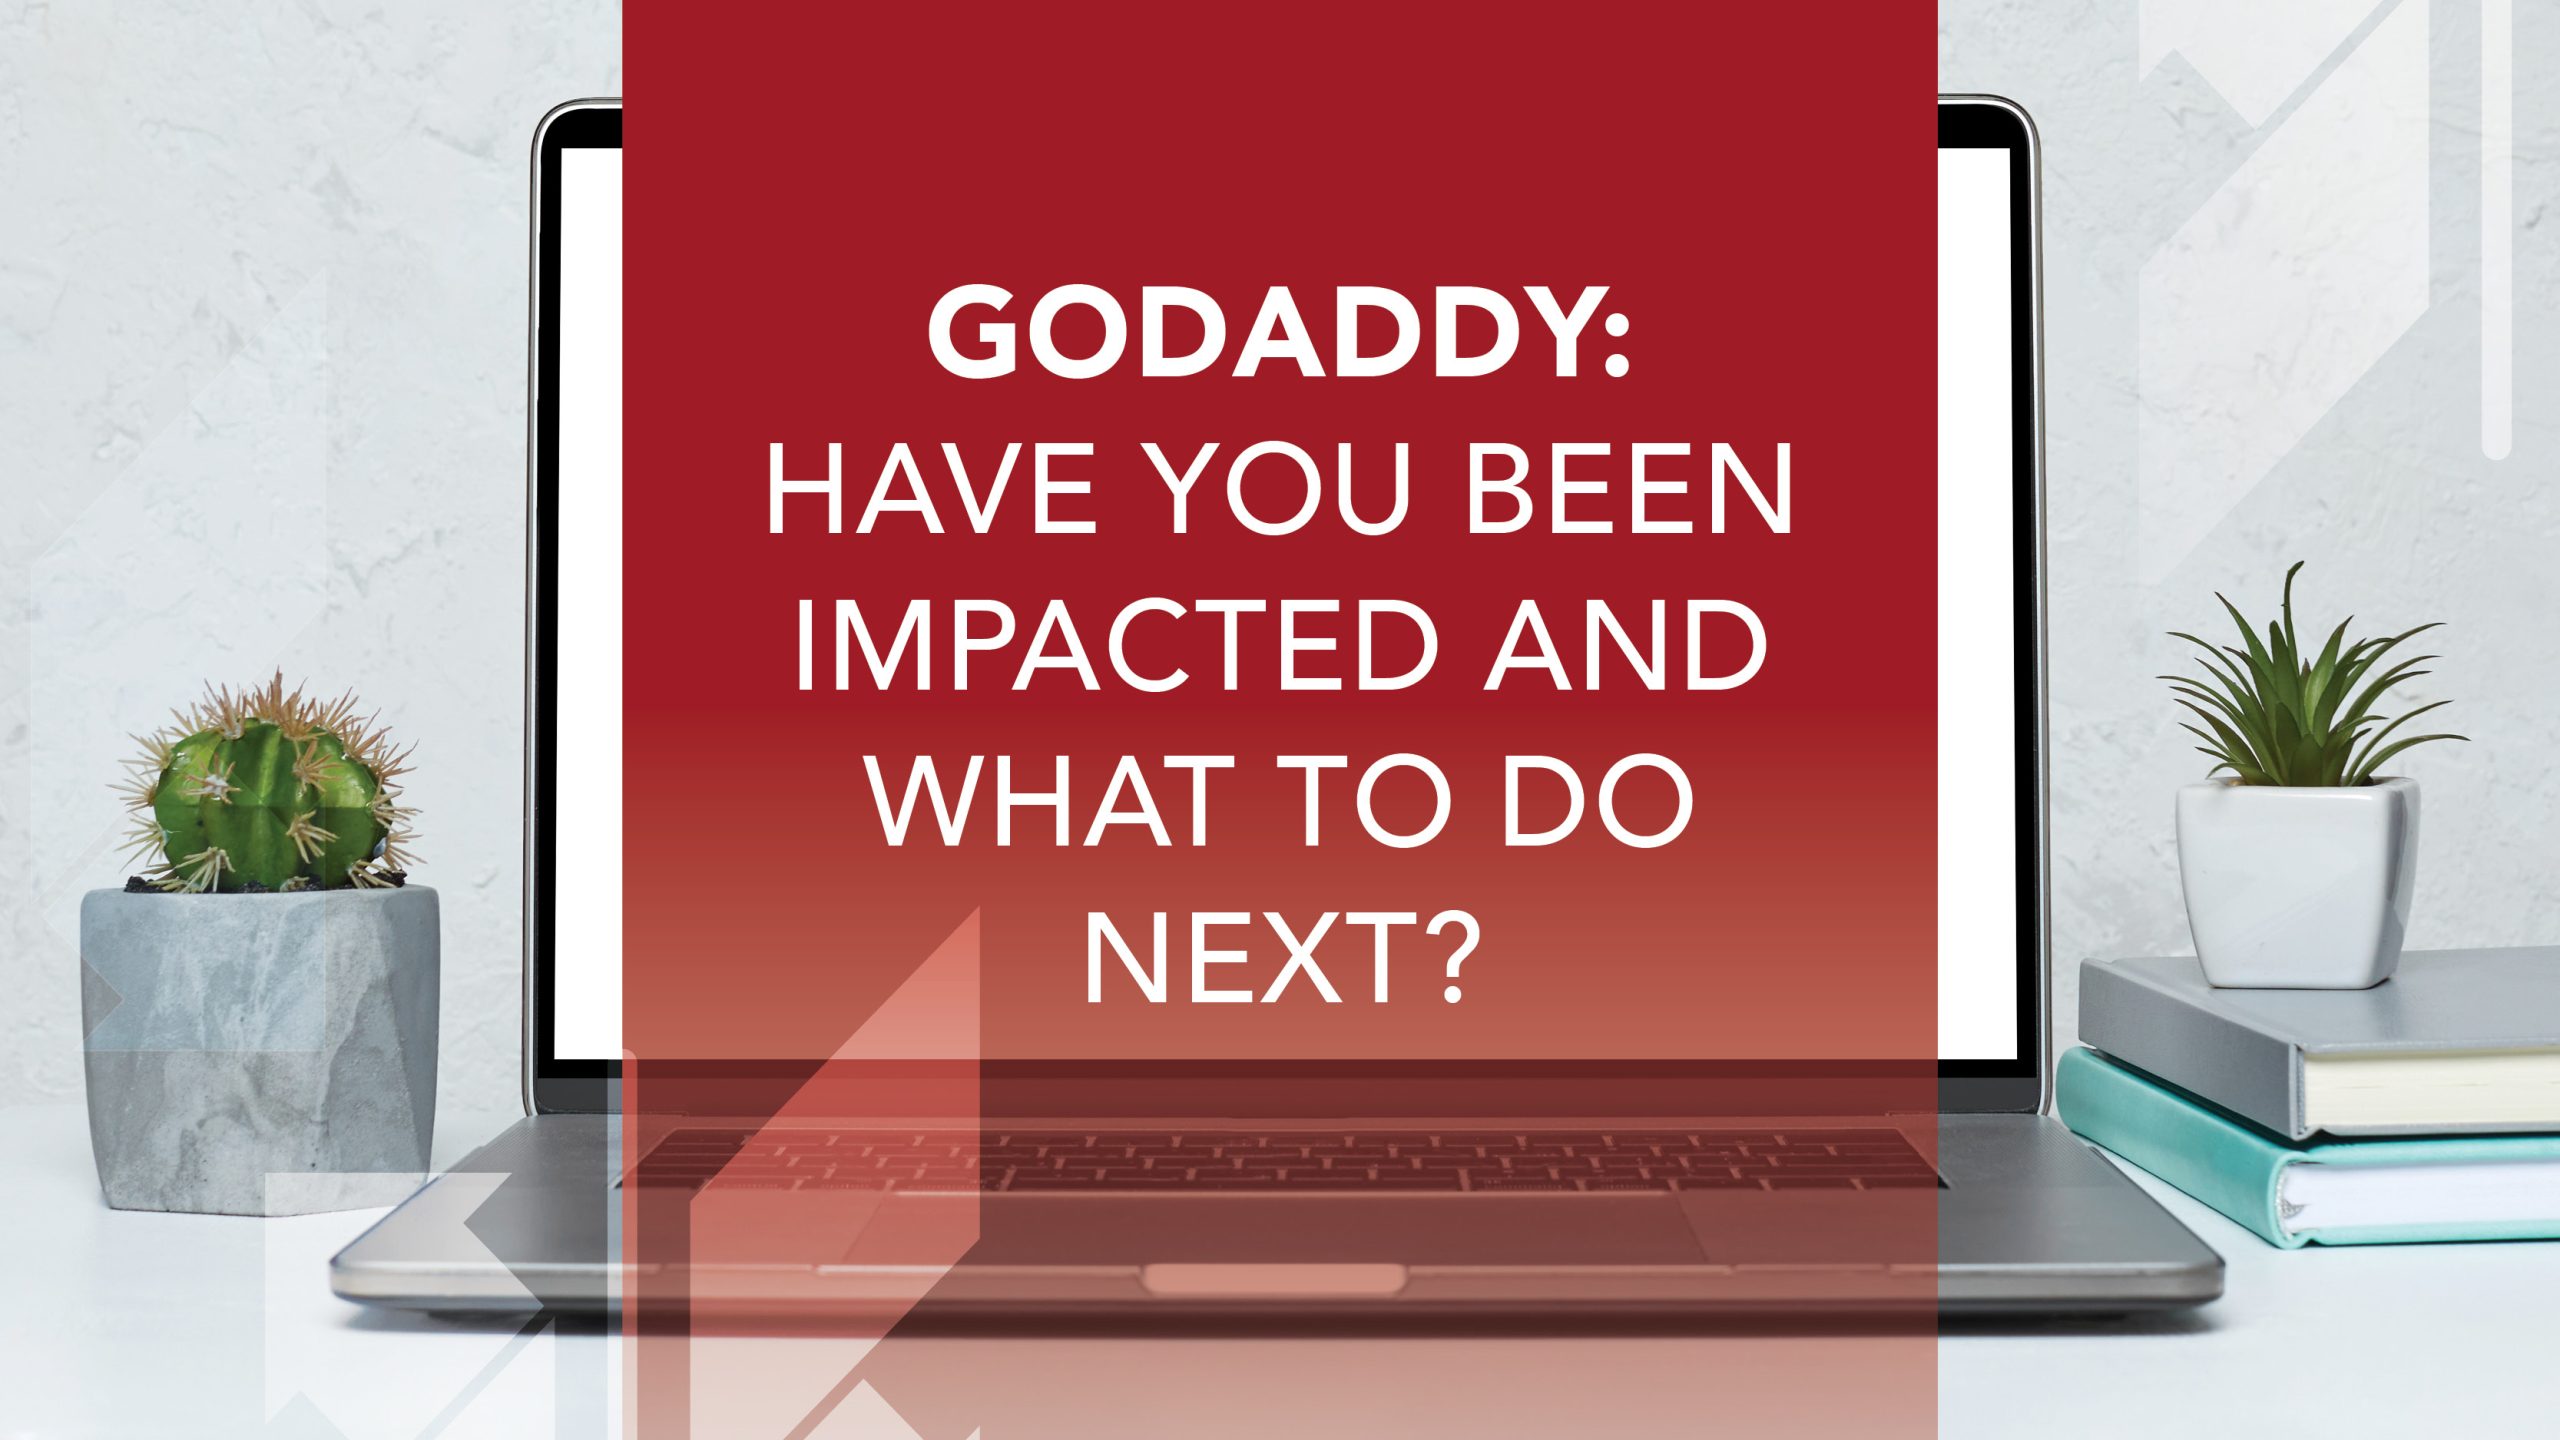 Have you been impacted by the godaddy breach?